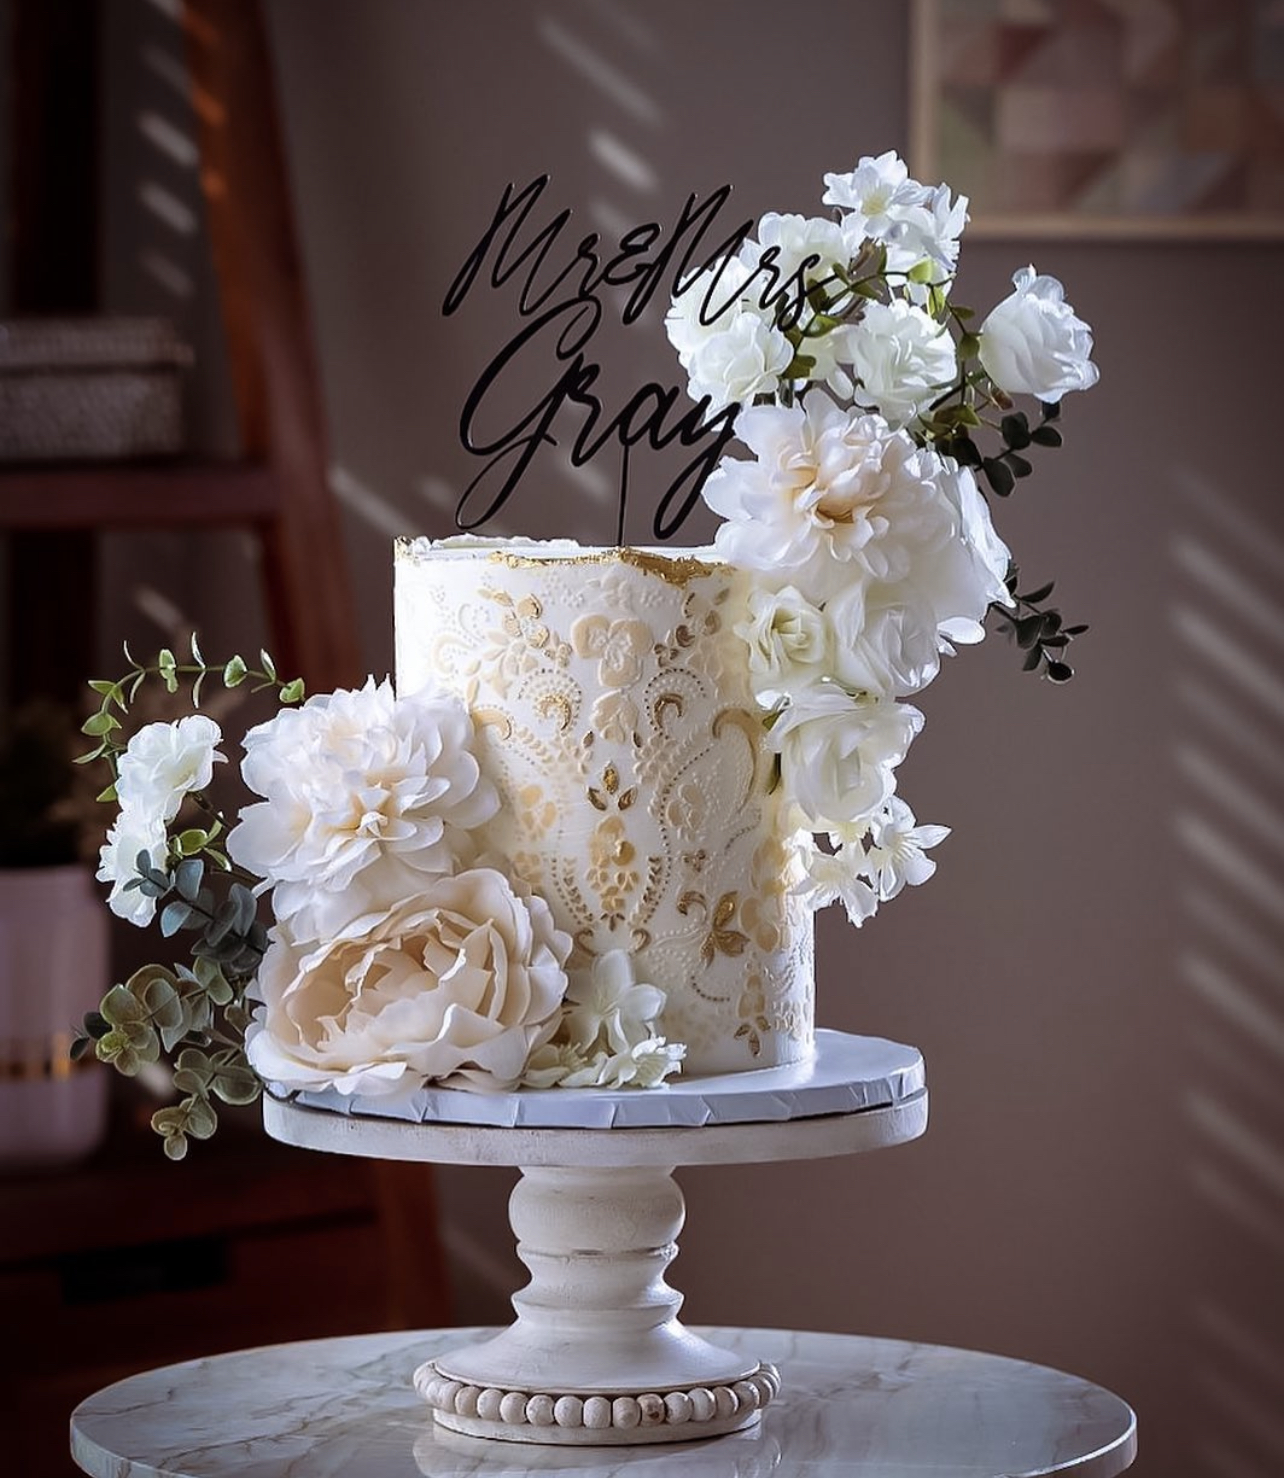 Everything Grows Cake Stencil Flower Lace Mesh Stencils For Wedding Cake  Border Stencils Fondant Mould Cake Decorating Tools 210721 From Cong09,  $10.62 | DHgate.Com